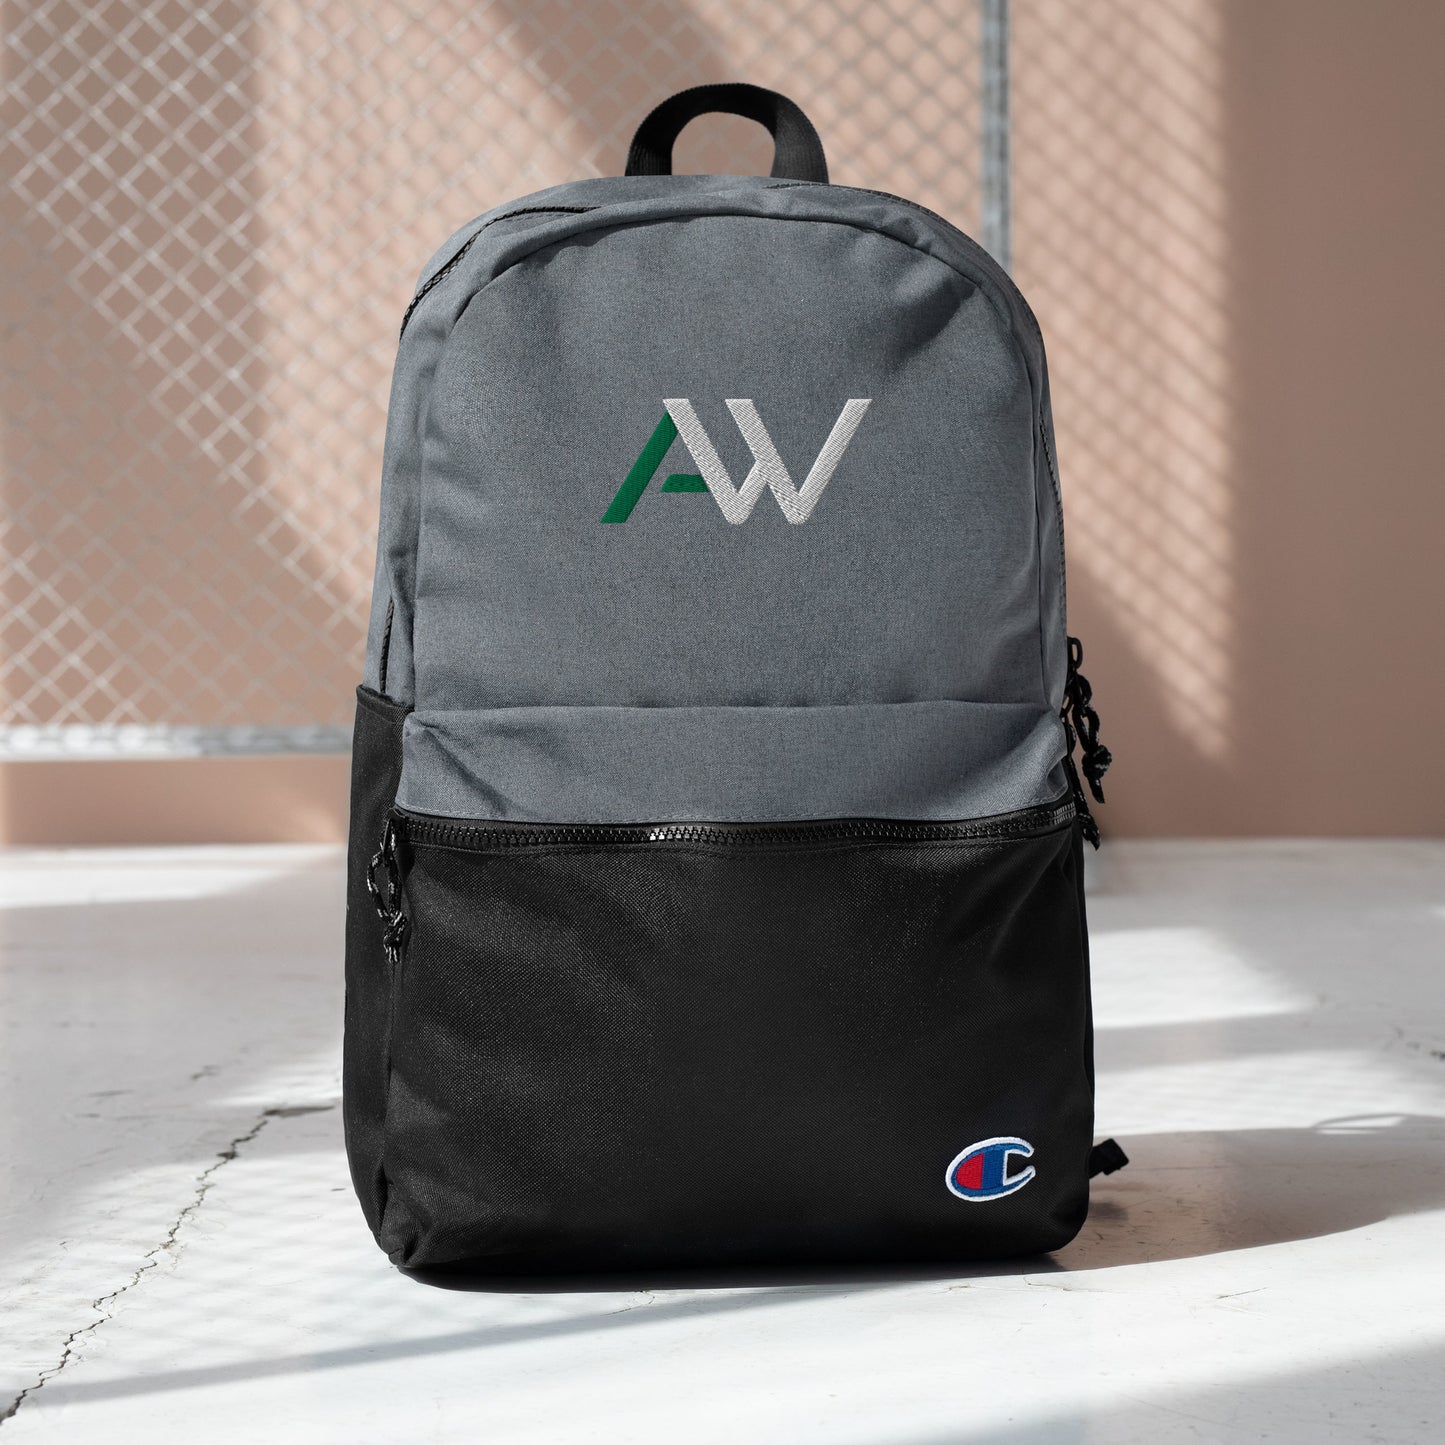 AW Embroidered Champion Backpack